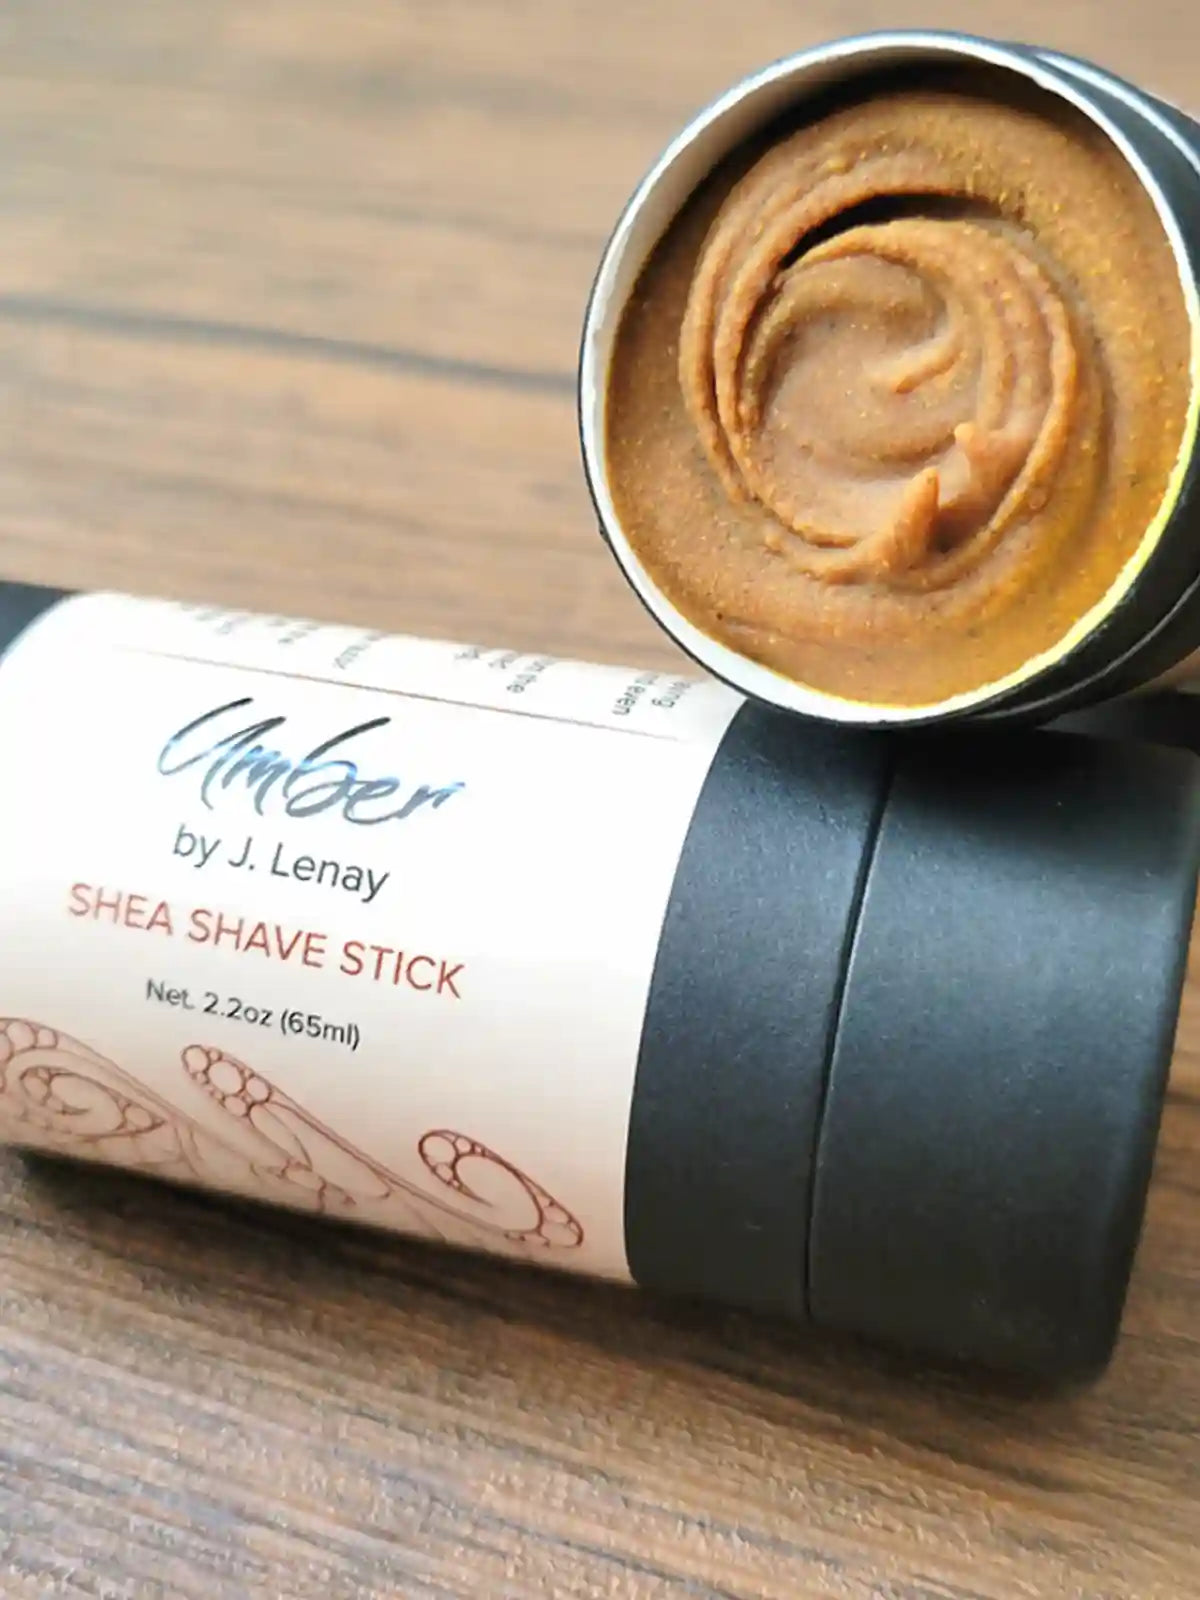 Umber by J. Lenay 2.2 oz Shea Butter Shave Stick helps moisturize skin and clear dark spots